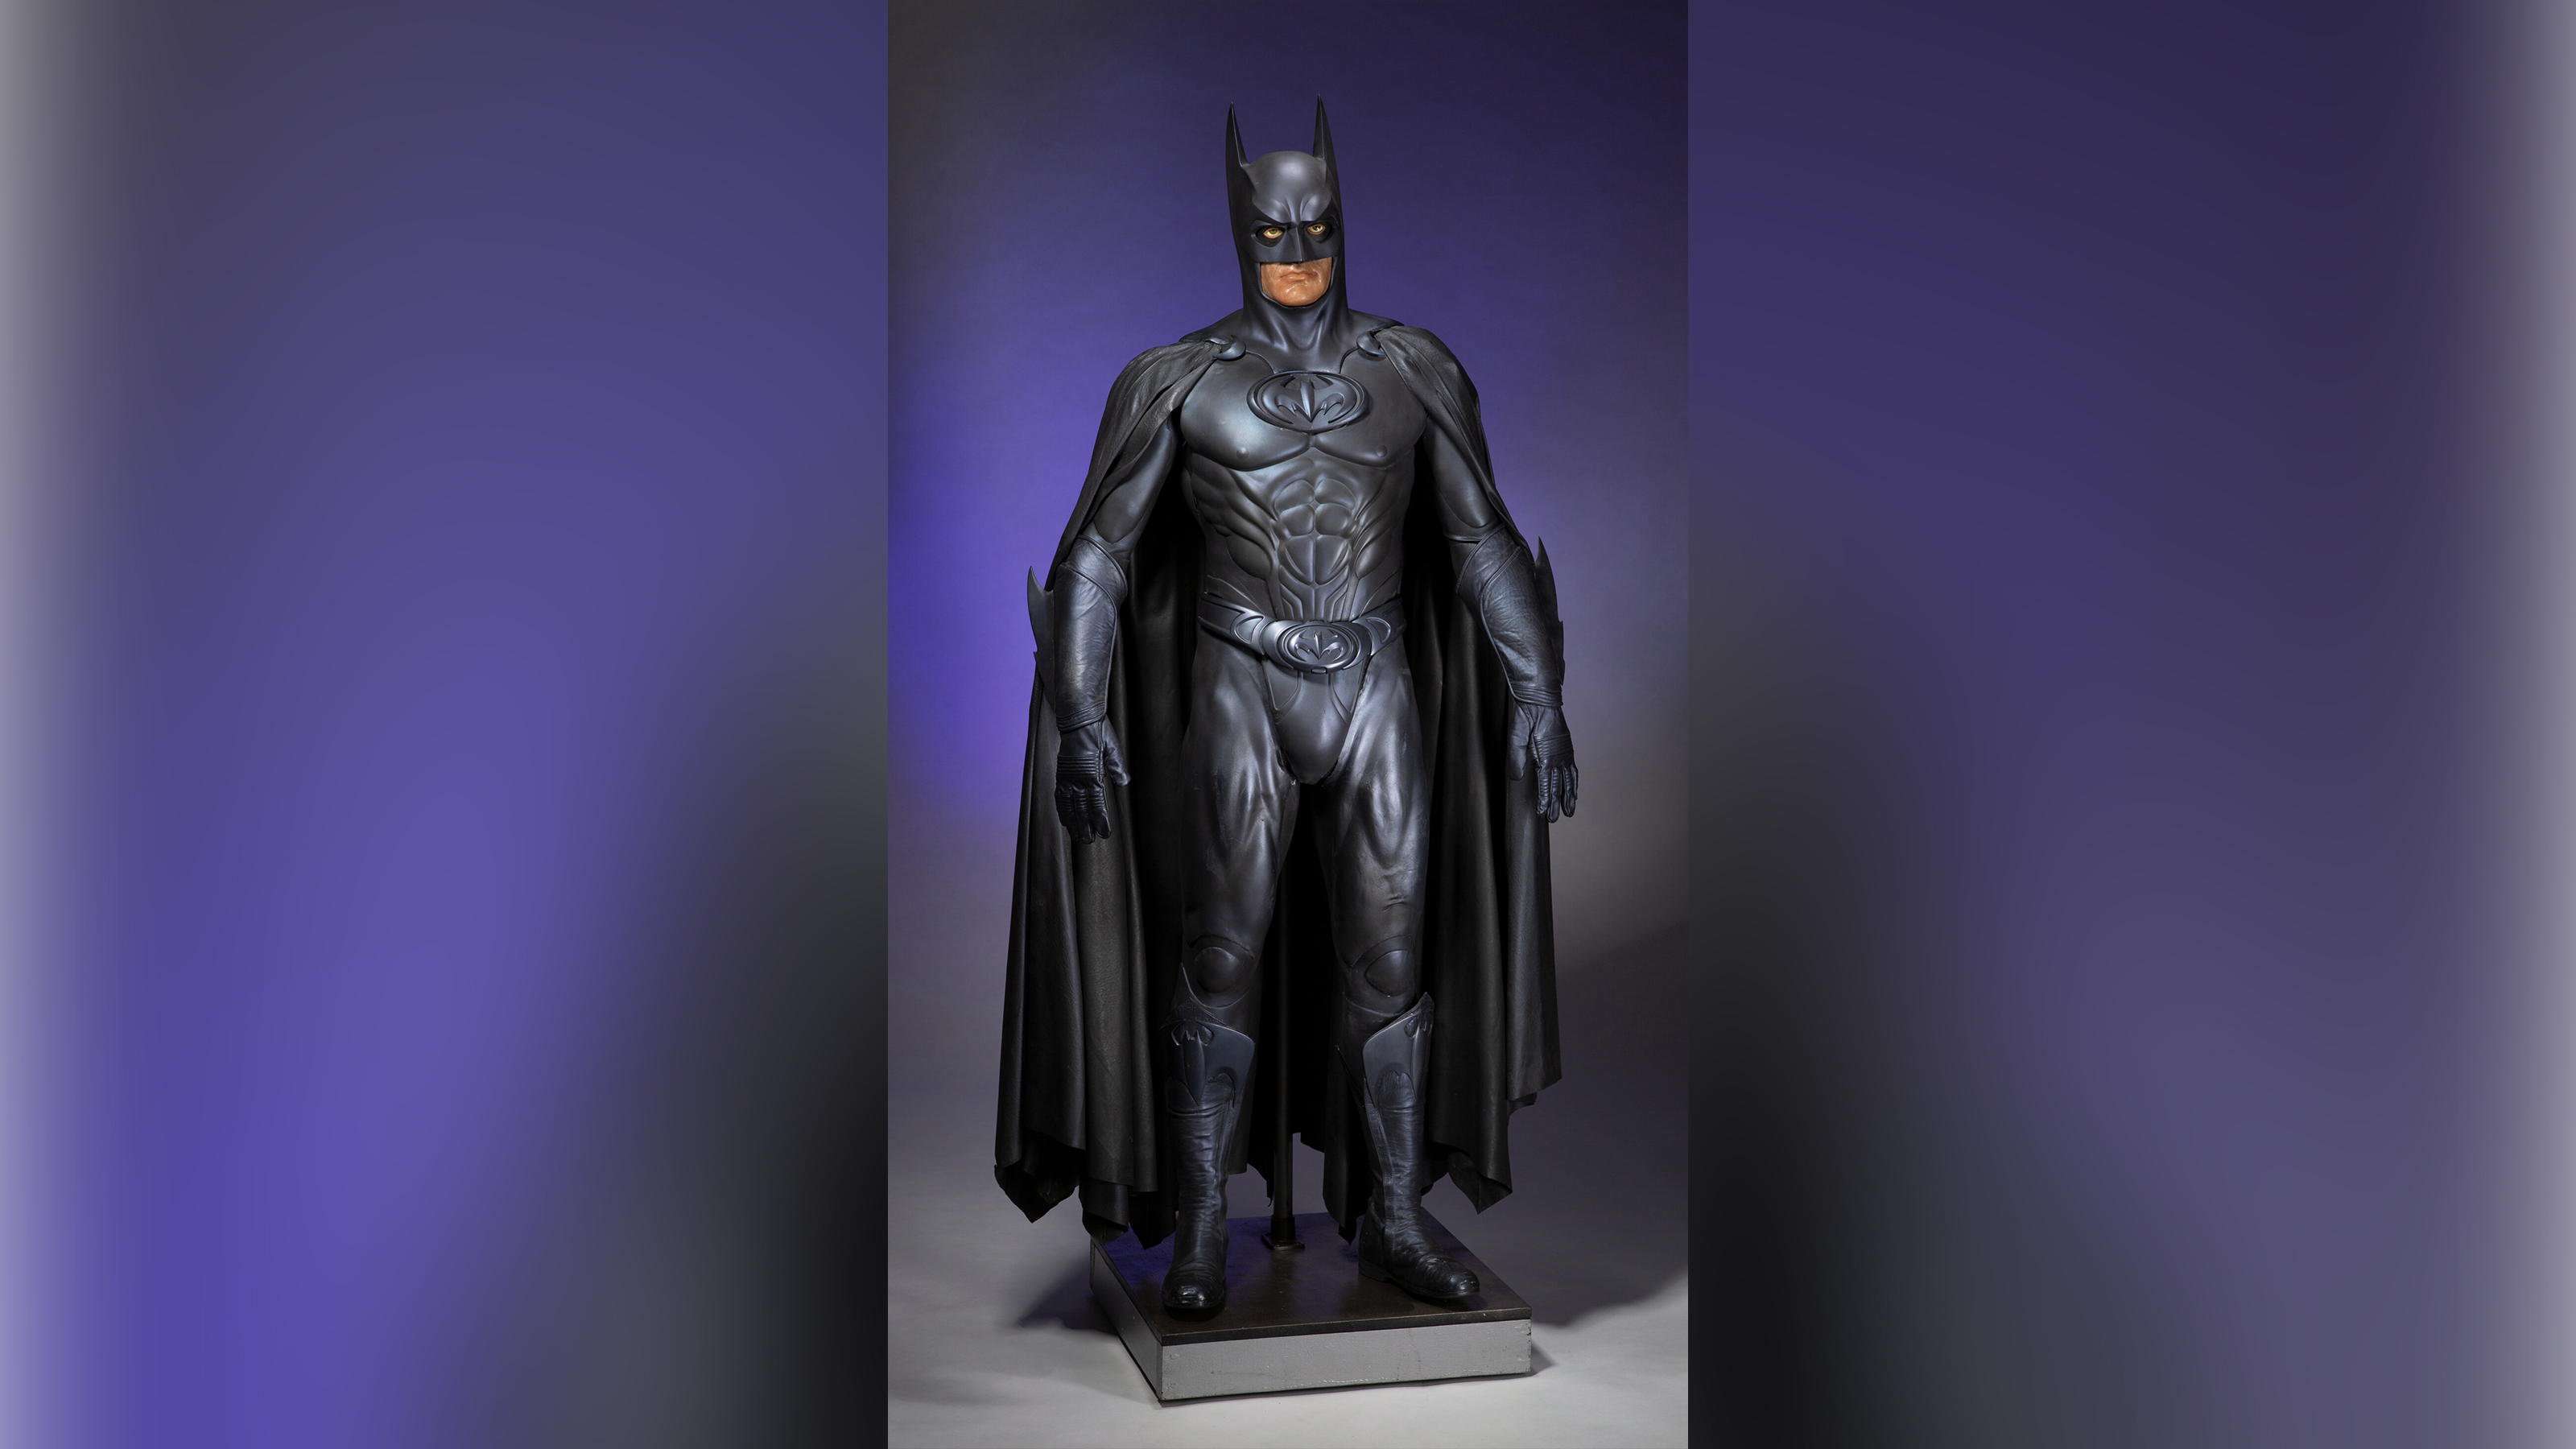 You can now buy George Clooney's infamous Batman costume - CNN Style